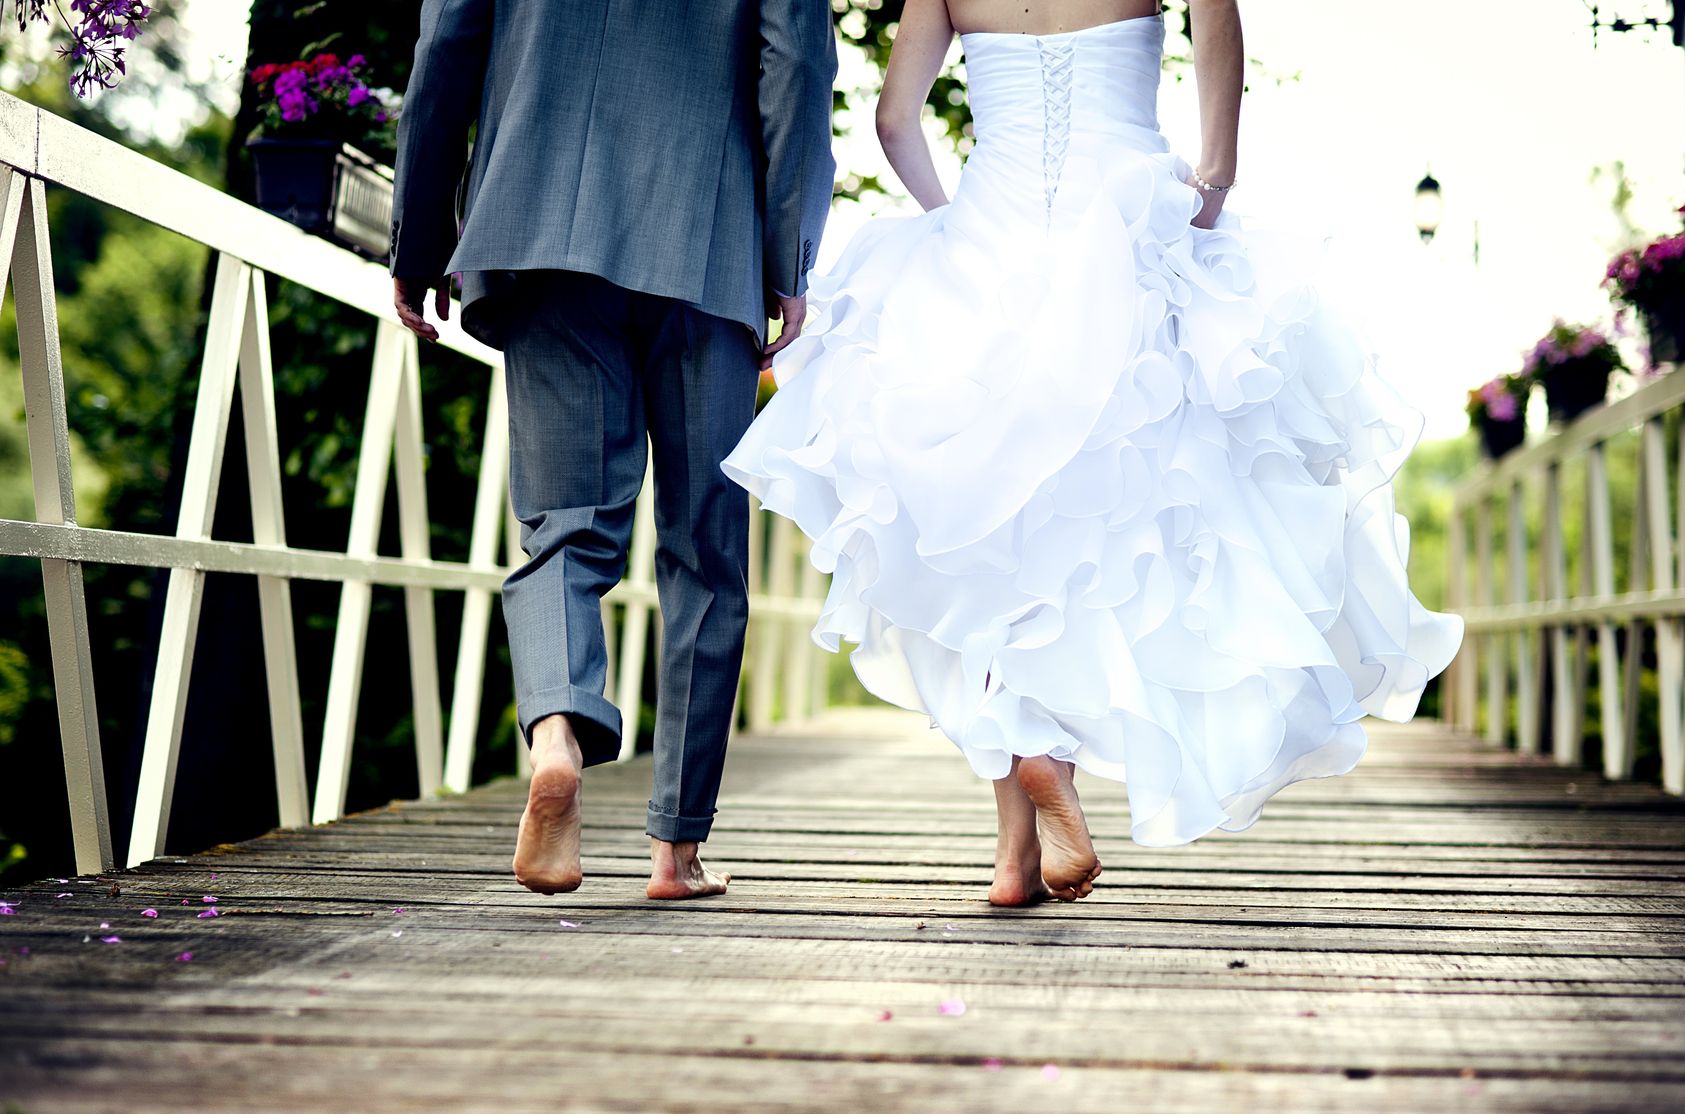 Pre-Nuptial Agreements – Do you really need one?